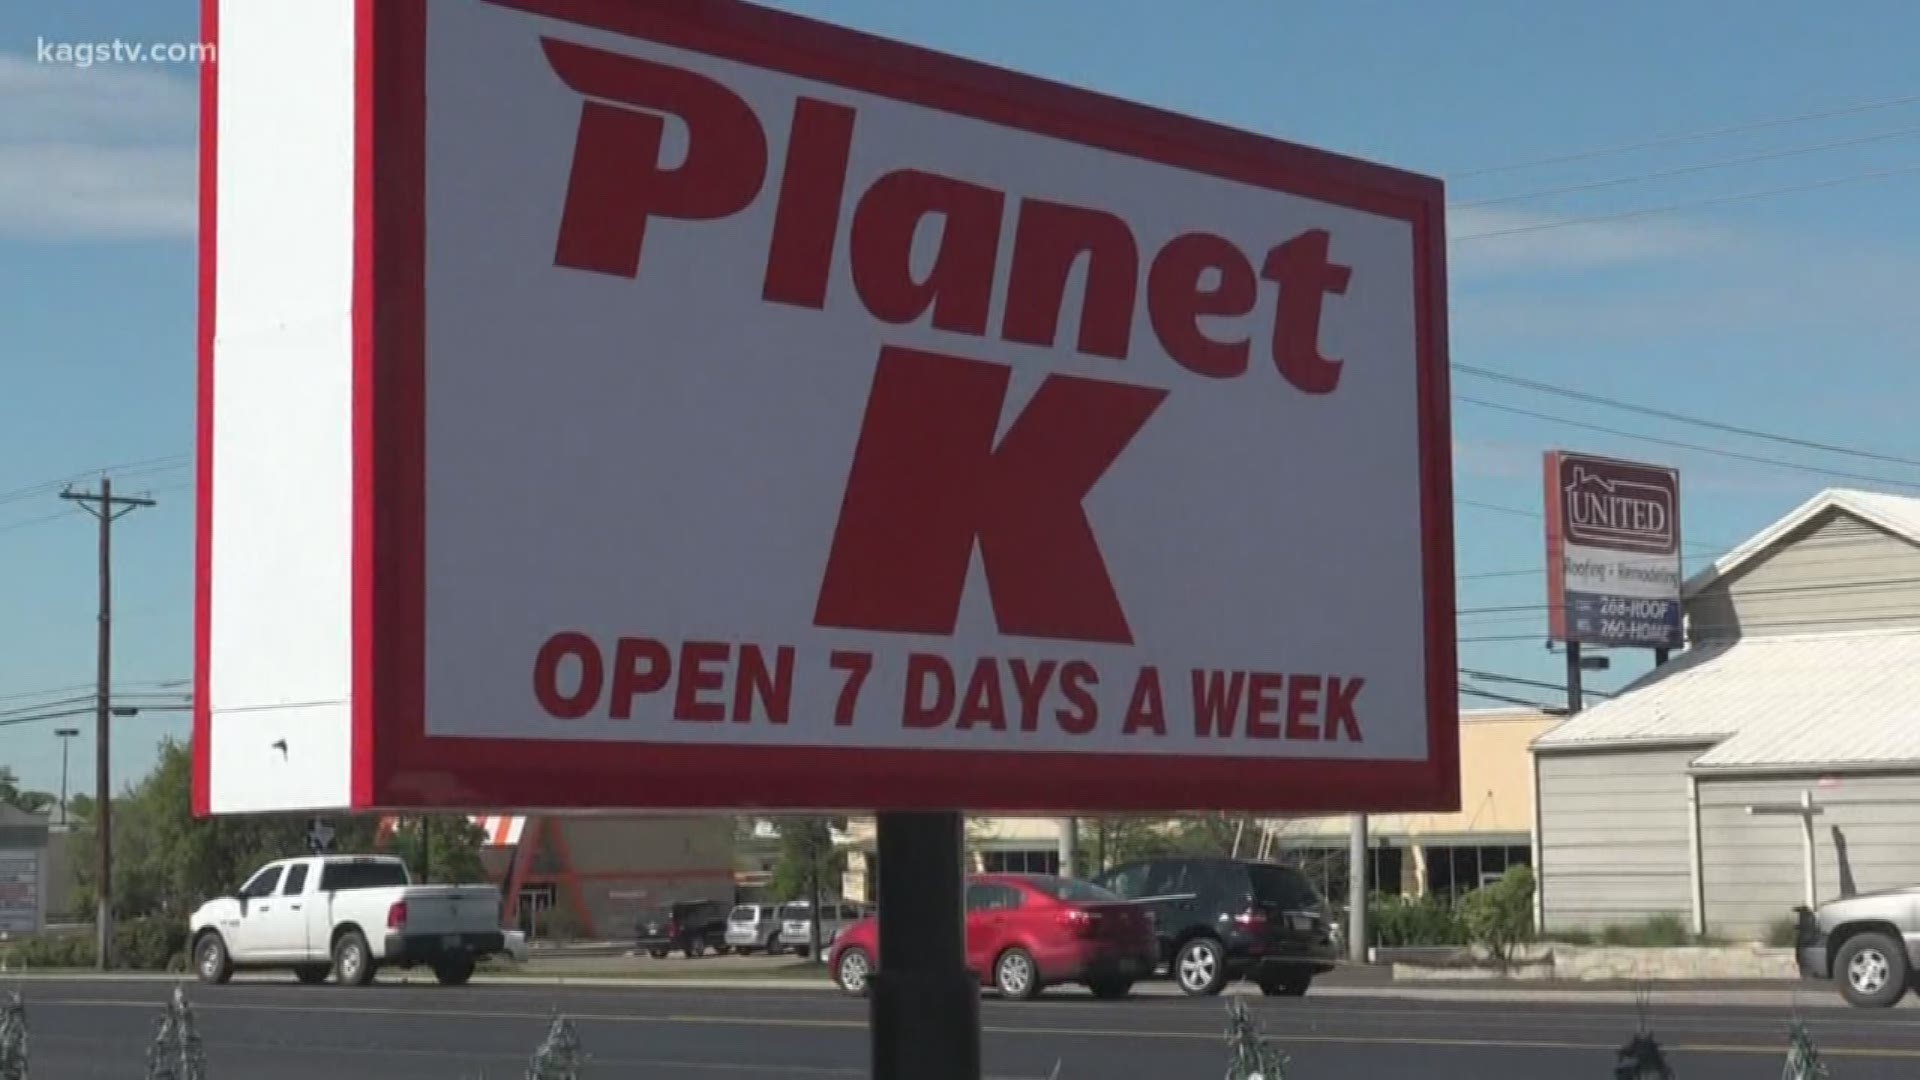 After months of legal issues with the City of Bryan, Planet K is open for business.